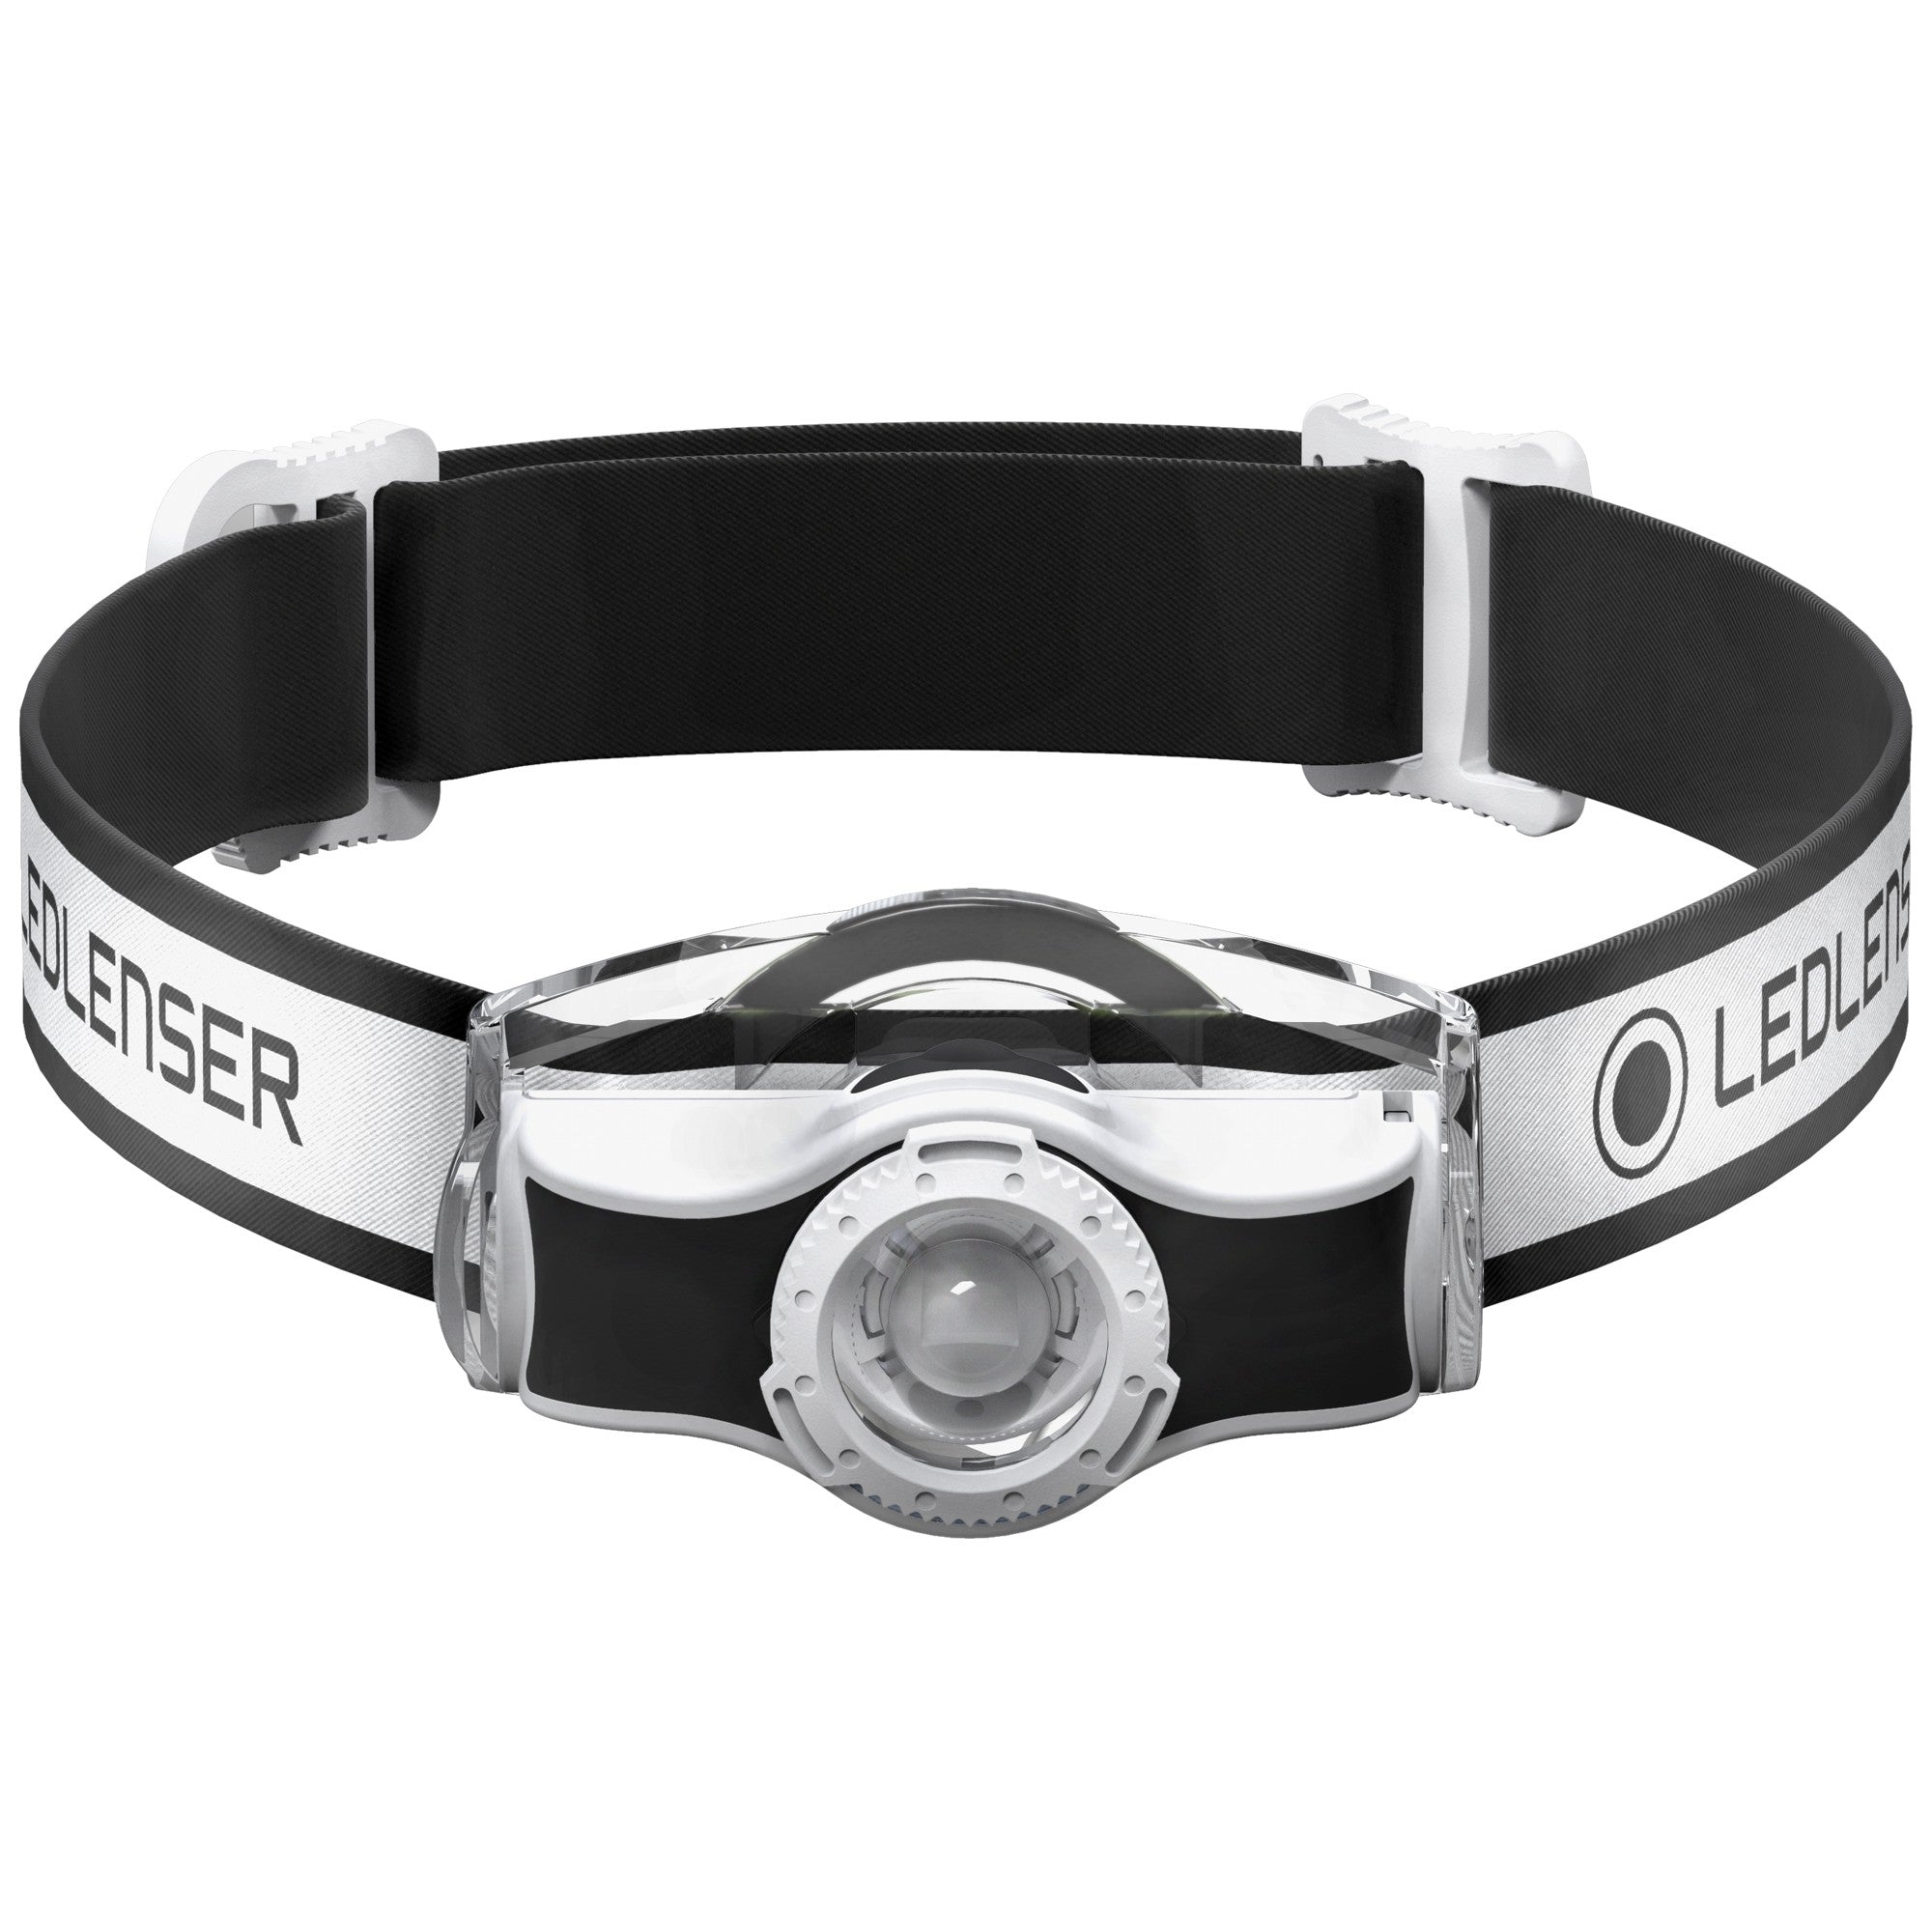 MH5 Black Rechargeable Headlamp